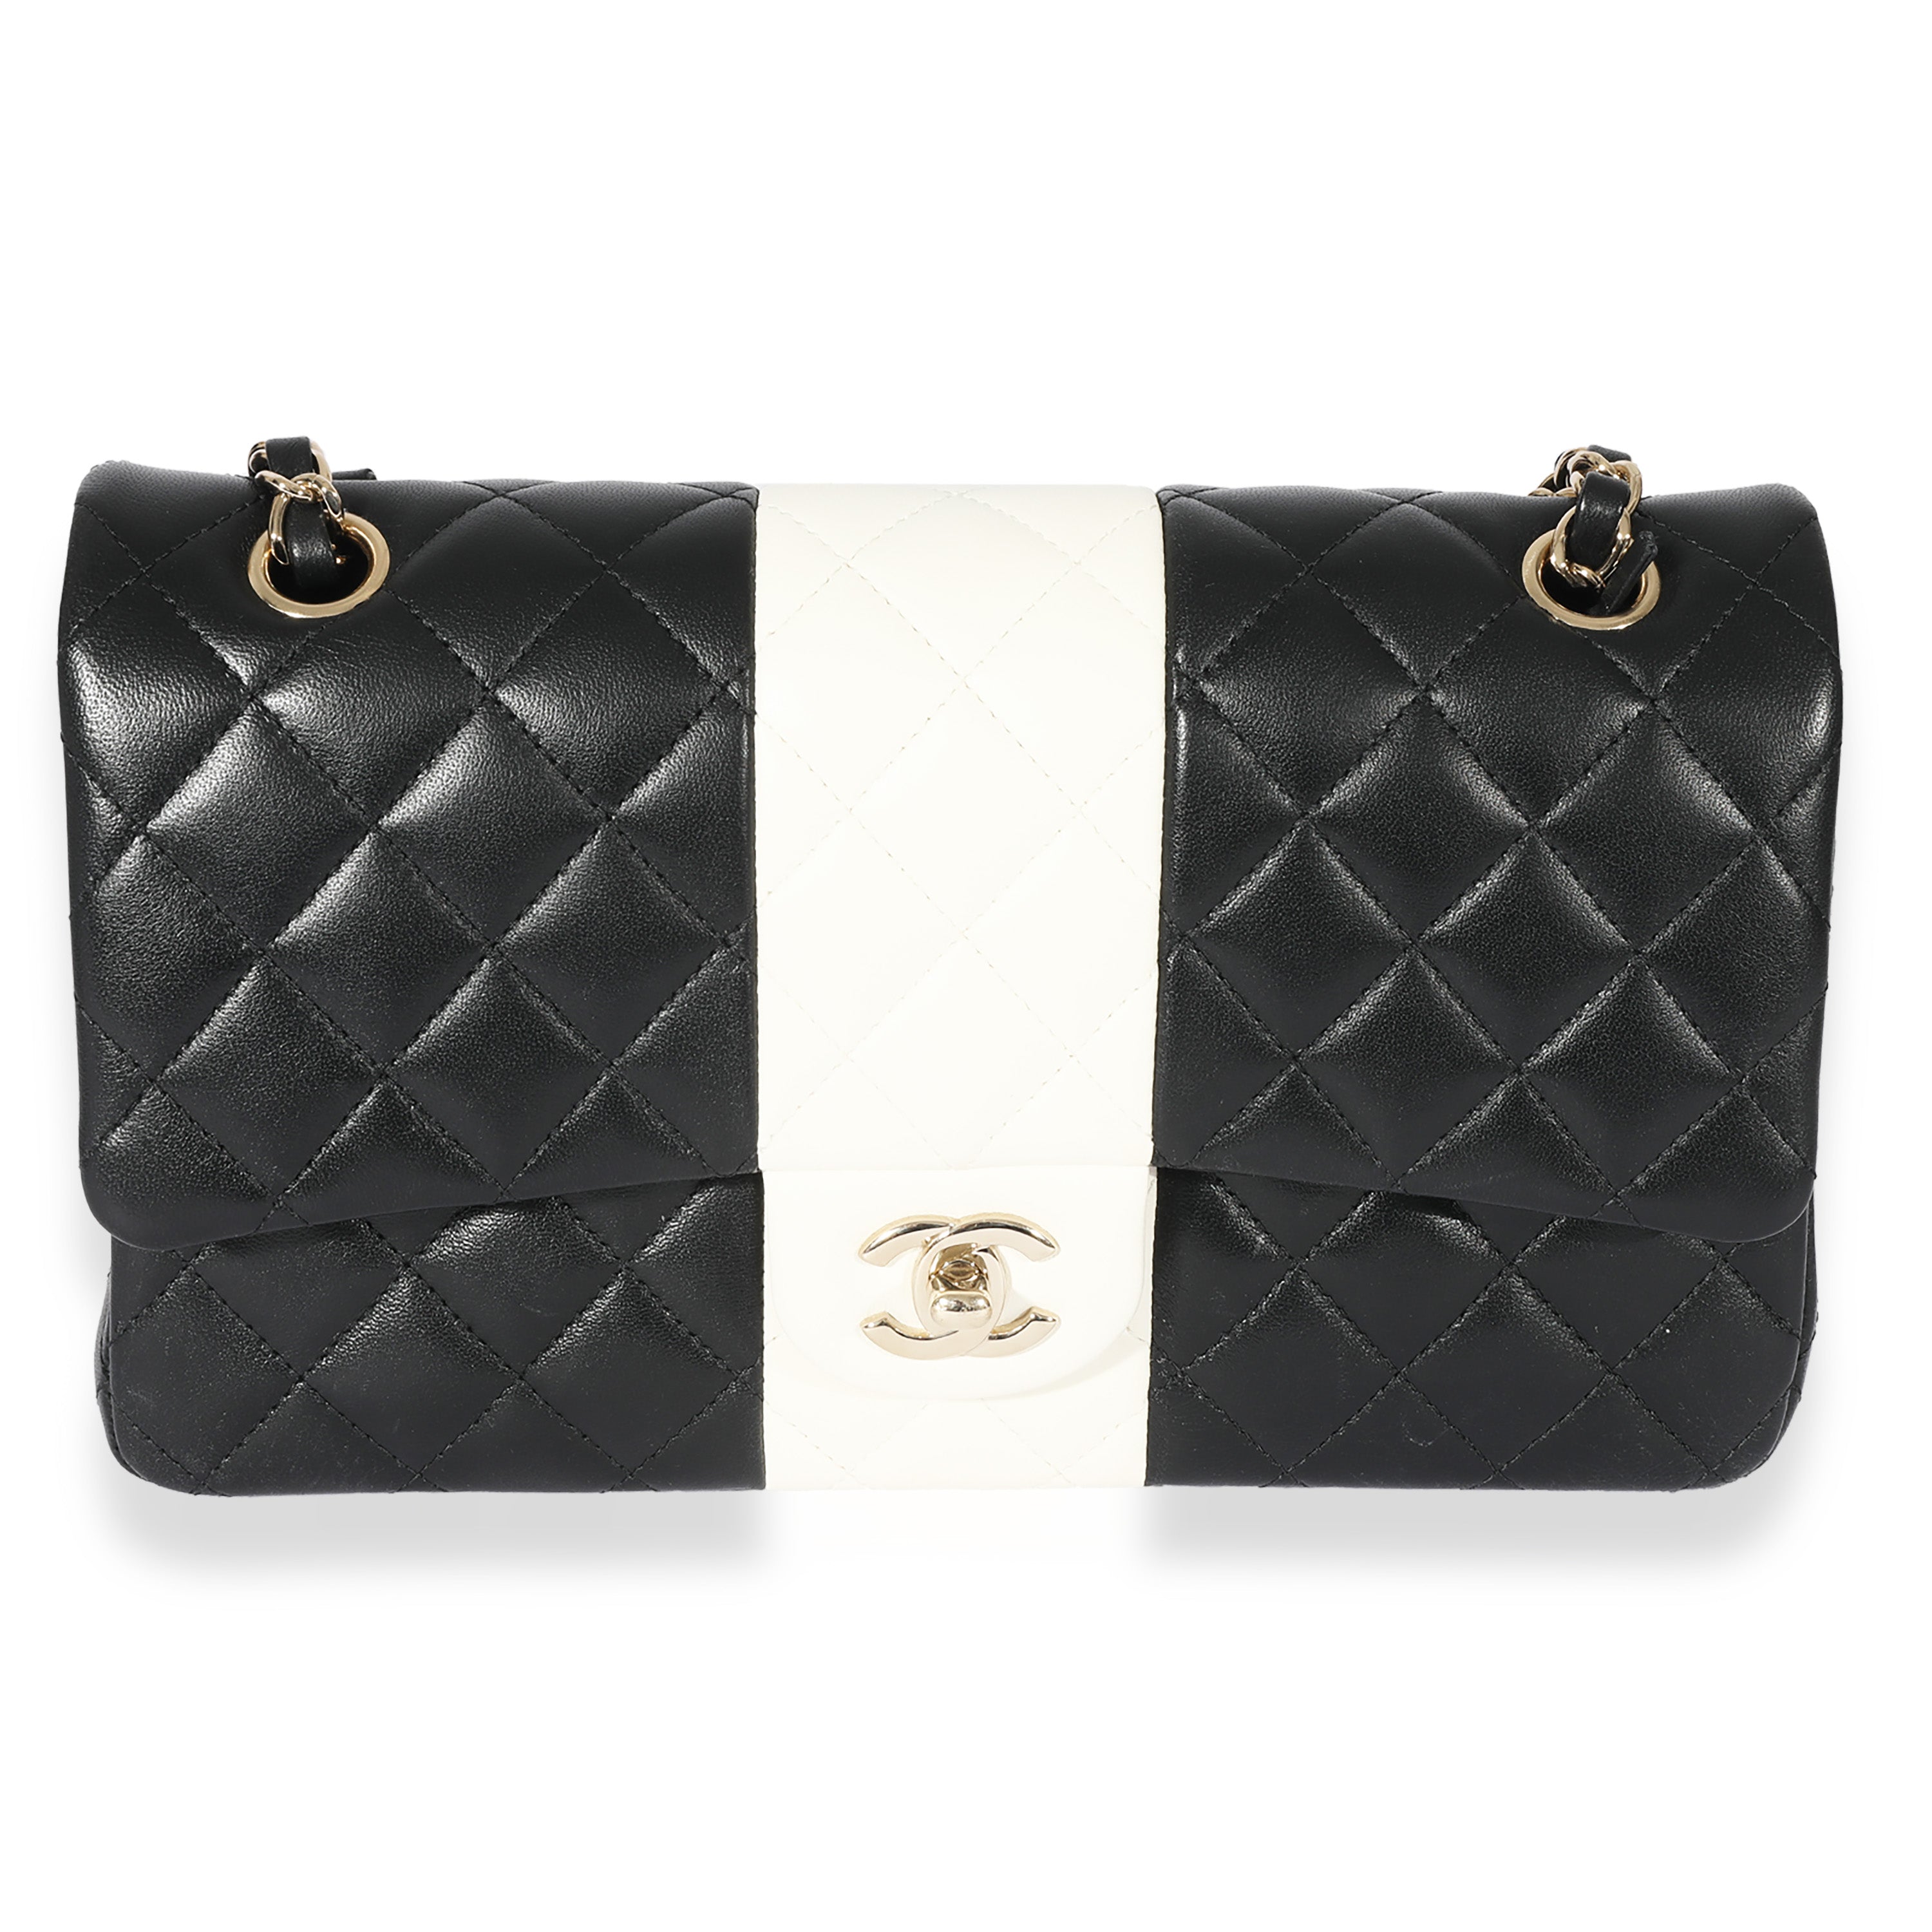 Chanel Multicolor Quilted Leather Medium Graphic Flap Bag Chanel